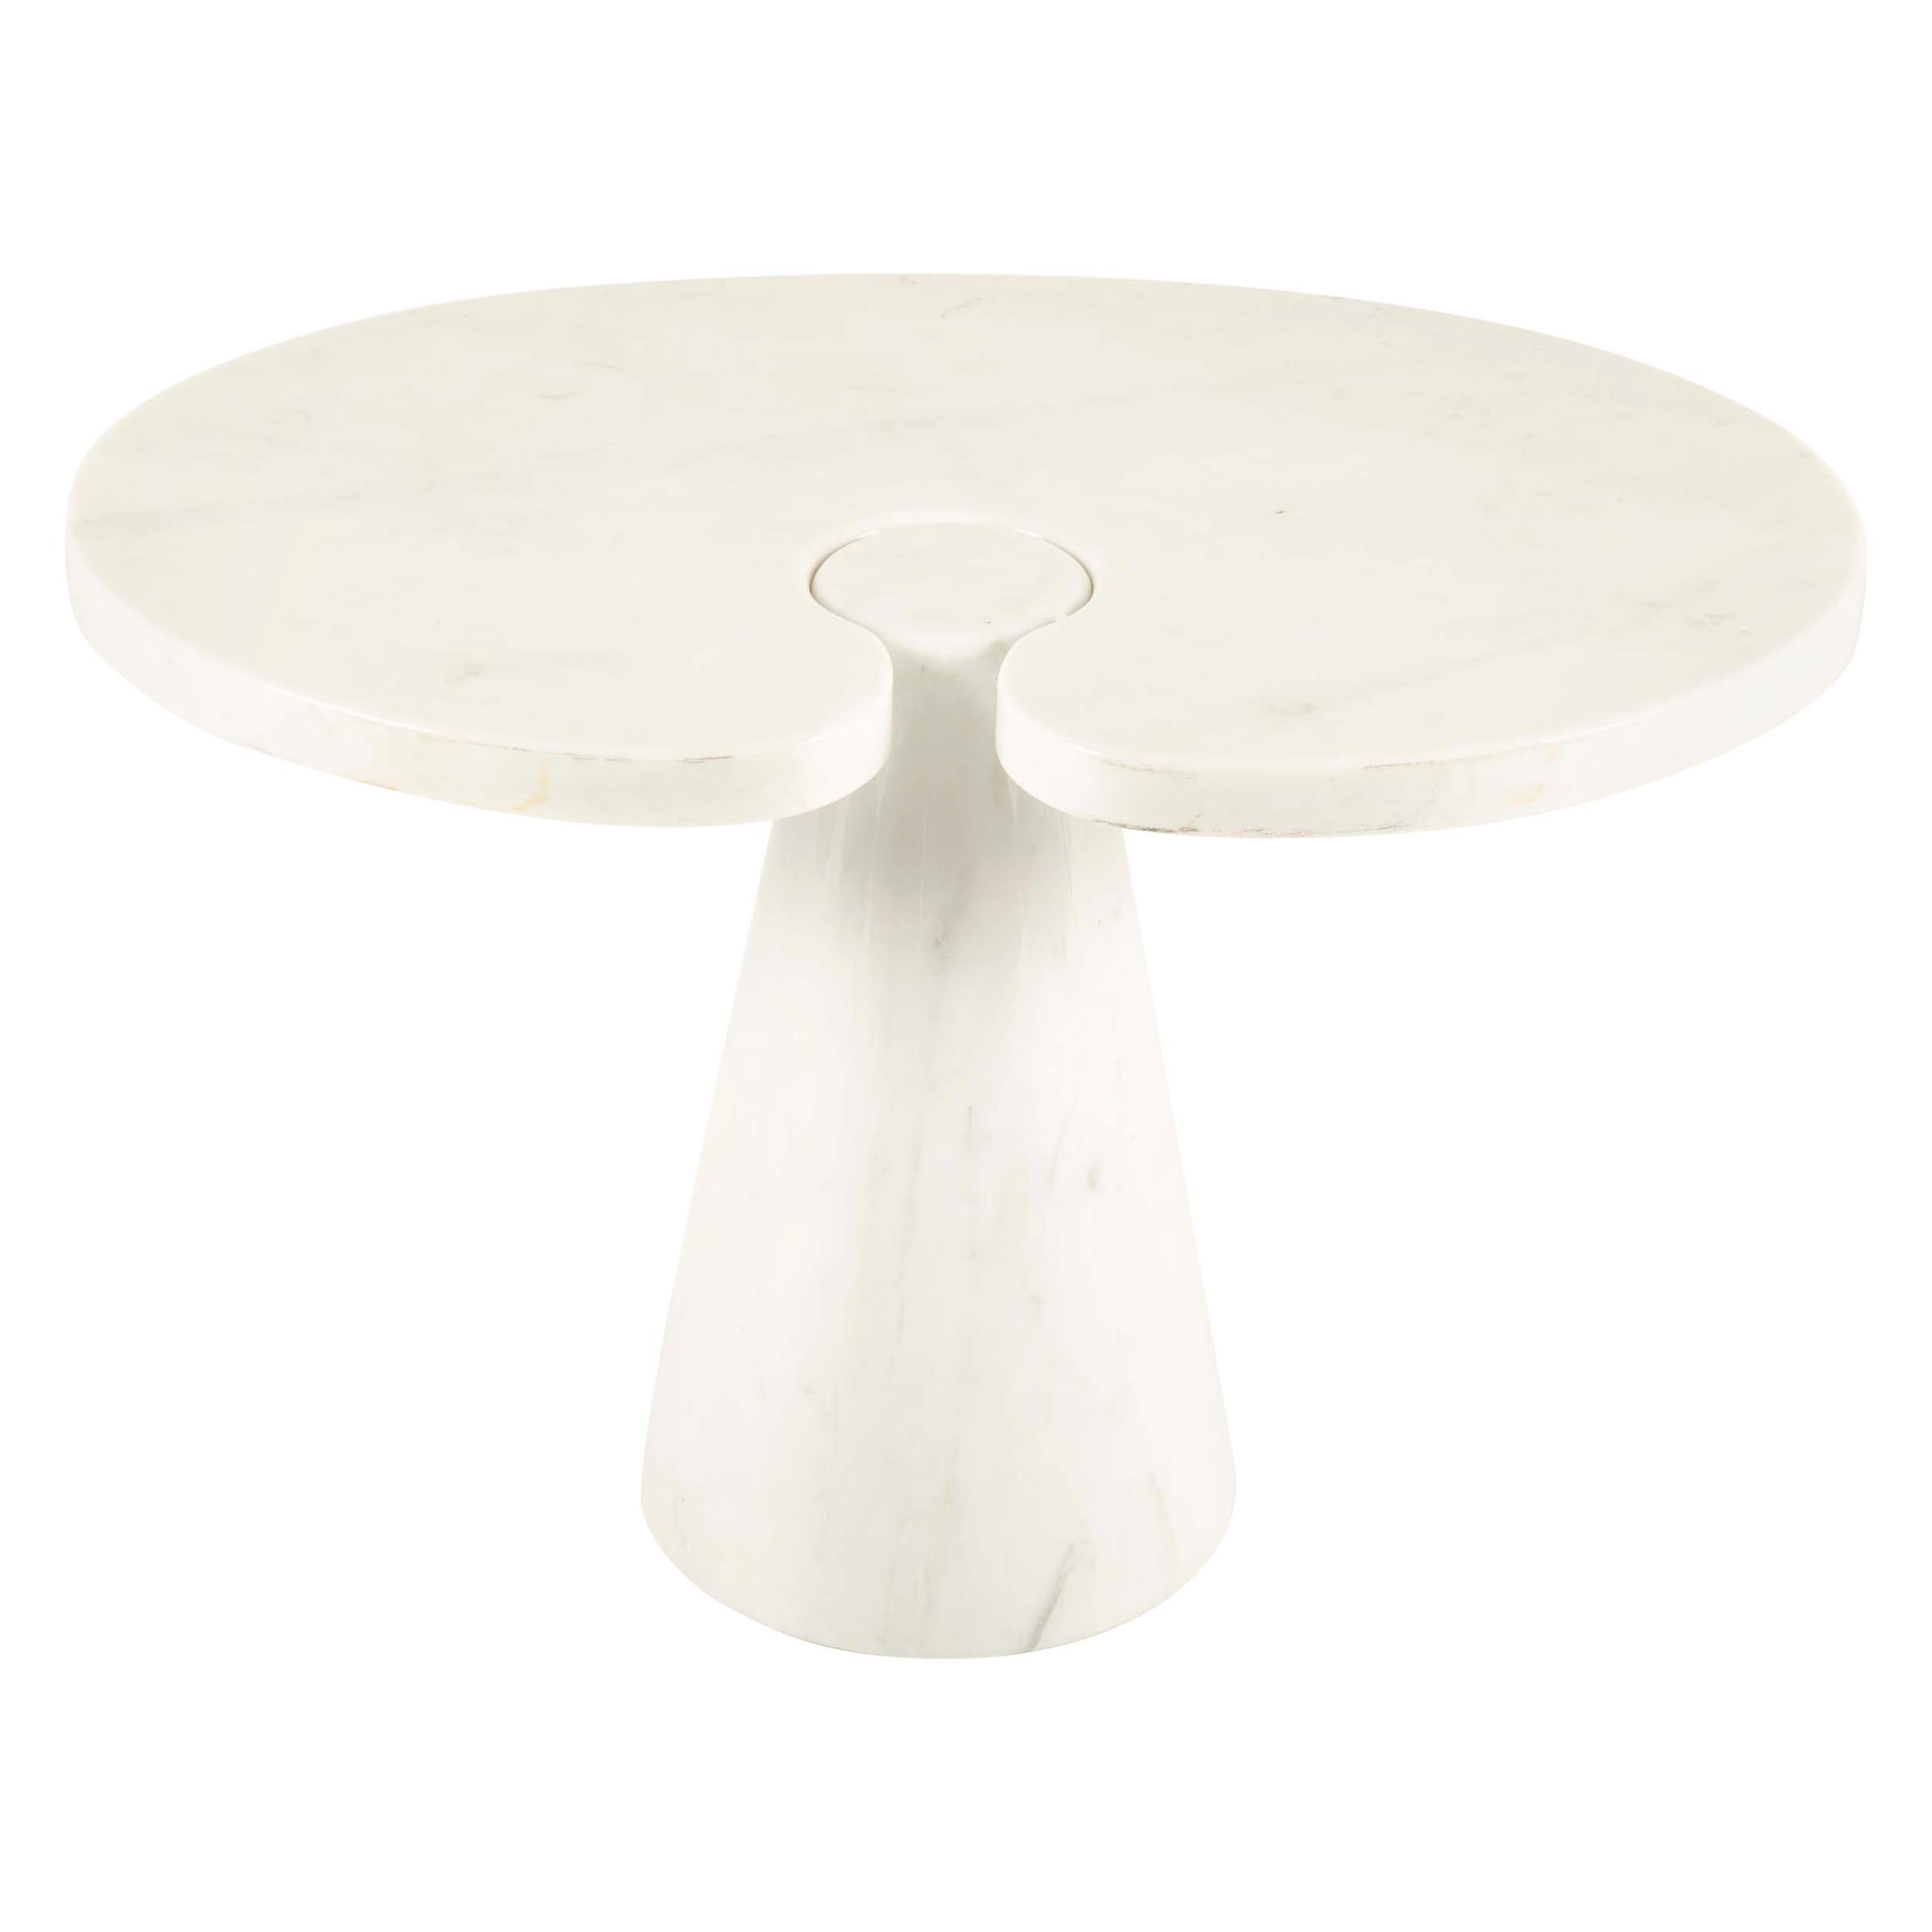 A pair of Carrara marble side / cocktail tables designed by Angelo Mangiarotti and produced by Skipper. Please note that while there are two available, the tables are priced individually.